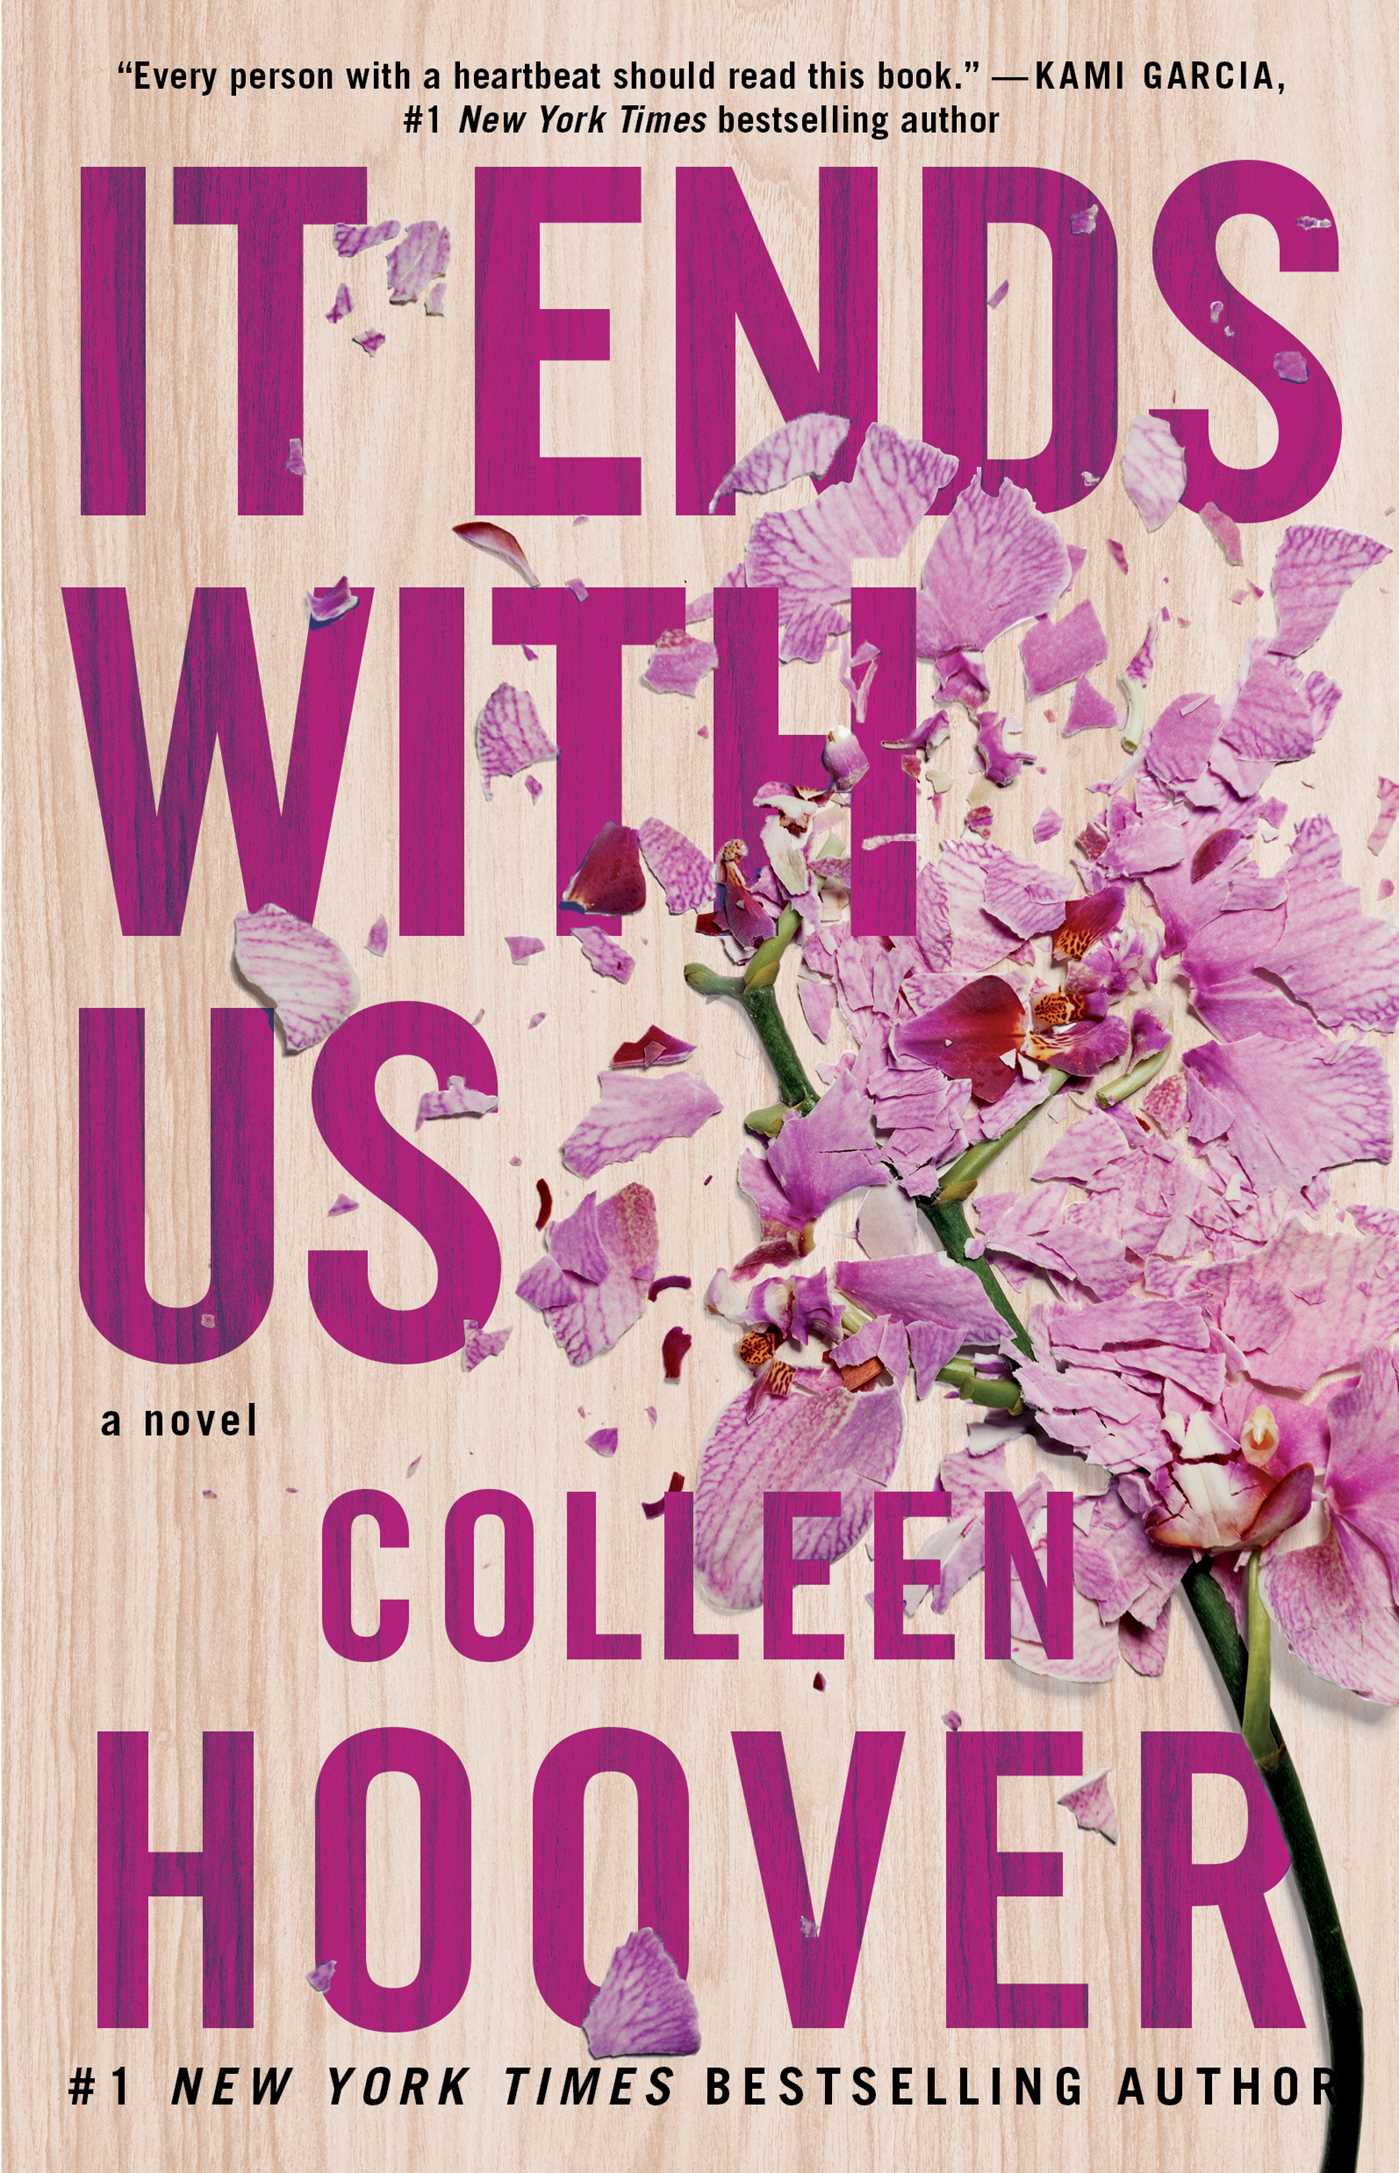 Colleen Hoover making reading 'cool' again – The Knight Crier